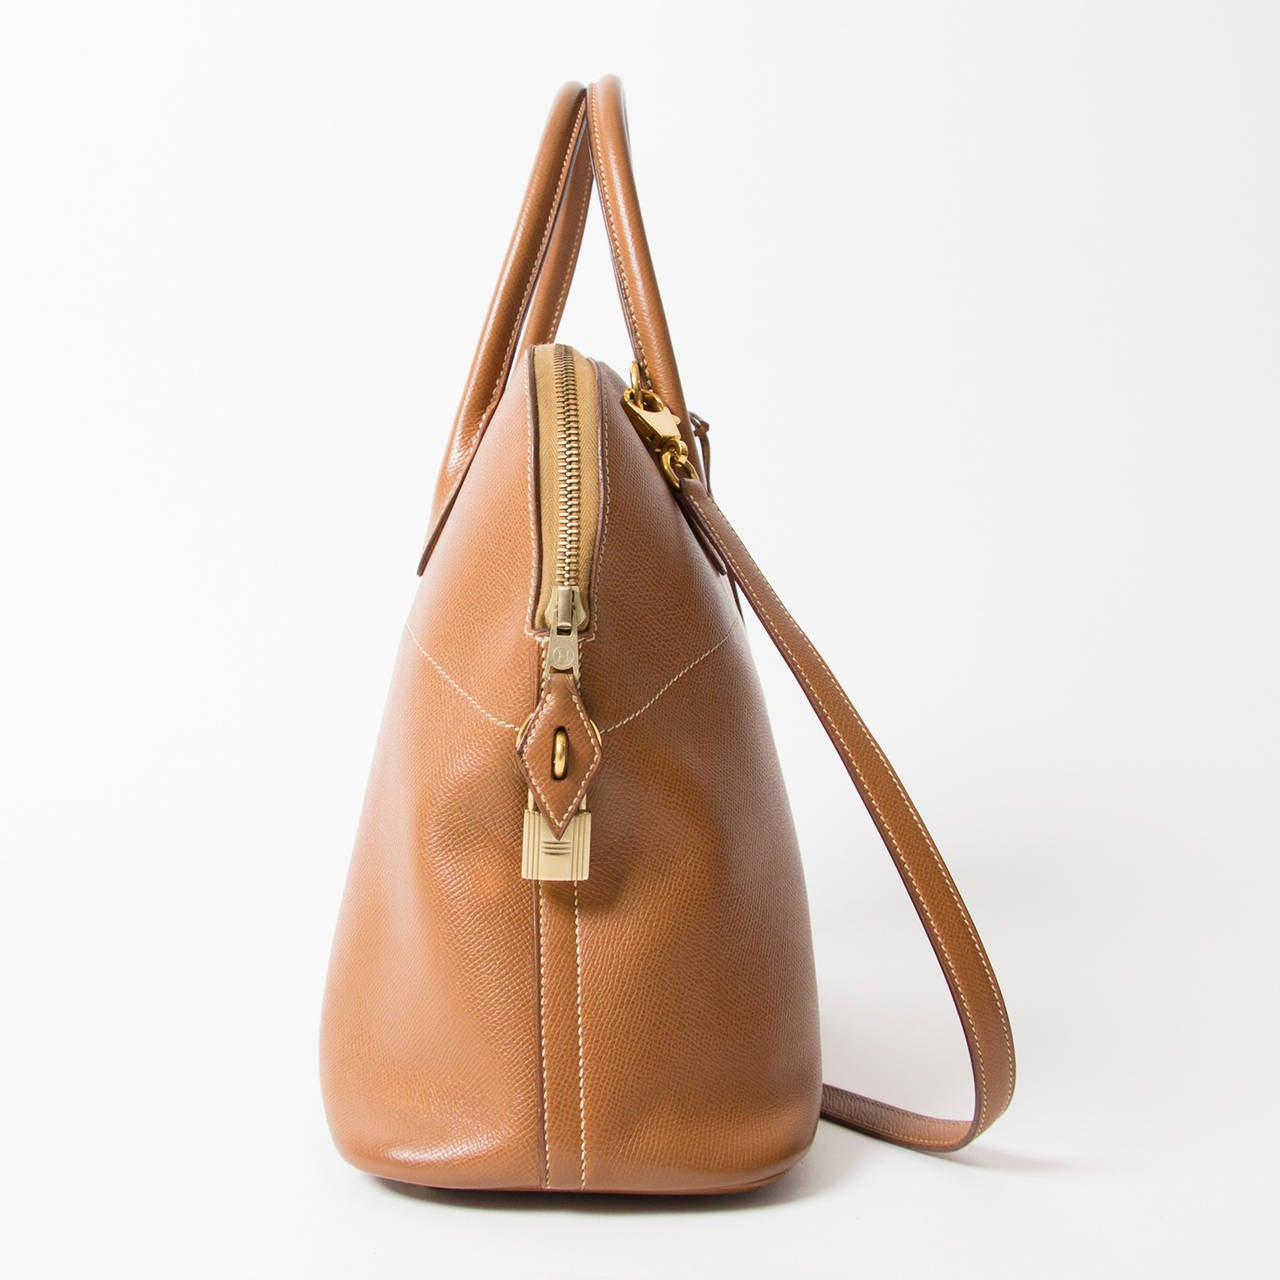 Emile-Maurice Hermès created this handbag for his wife that will be used for an automobile event in Paris. This is the first handbag to ever use a zipper. It is a domed top handle bag with a zip around closure. It also includes a removable leather